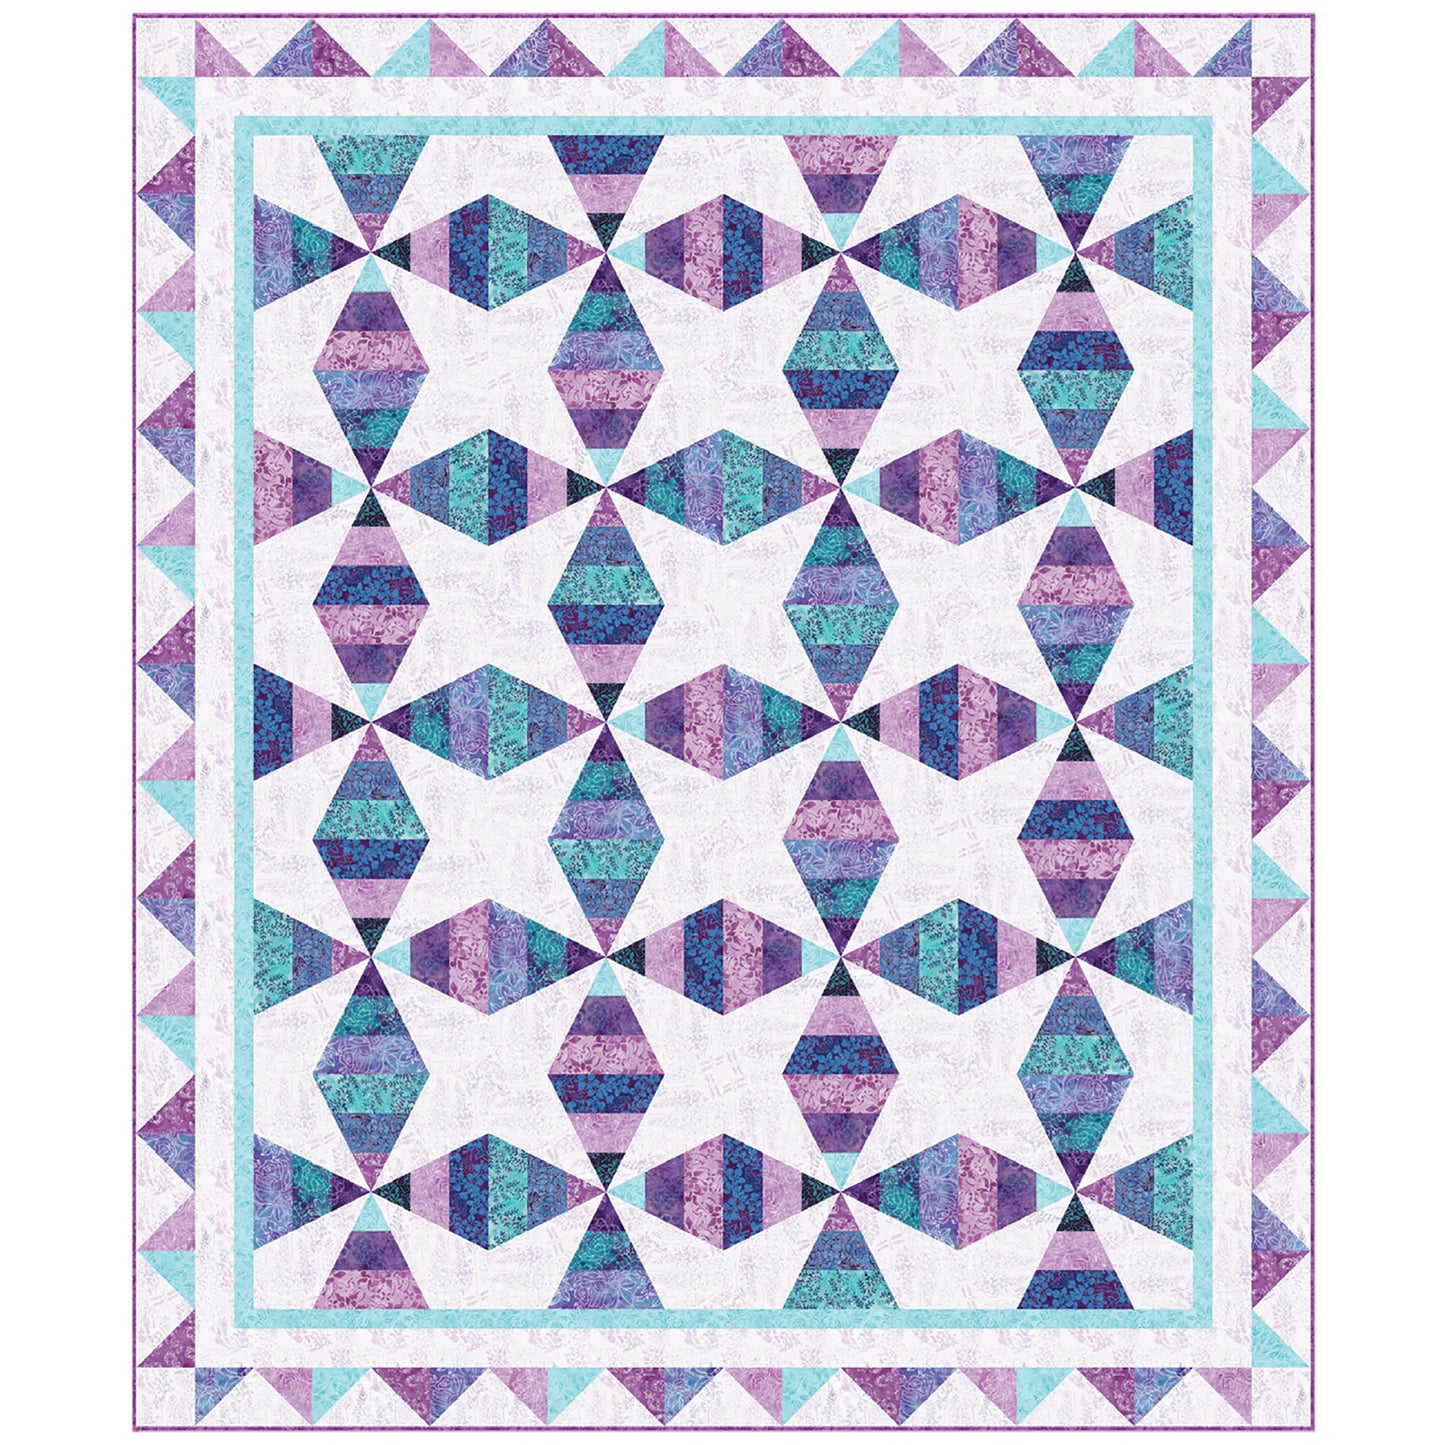 Creating Magic Quilt TWW-0968e - Downloadable Pattern